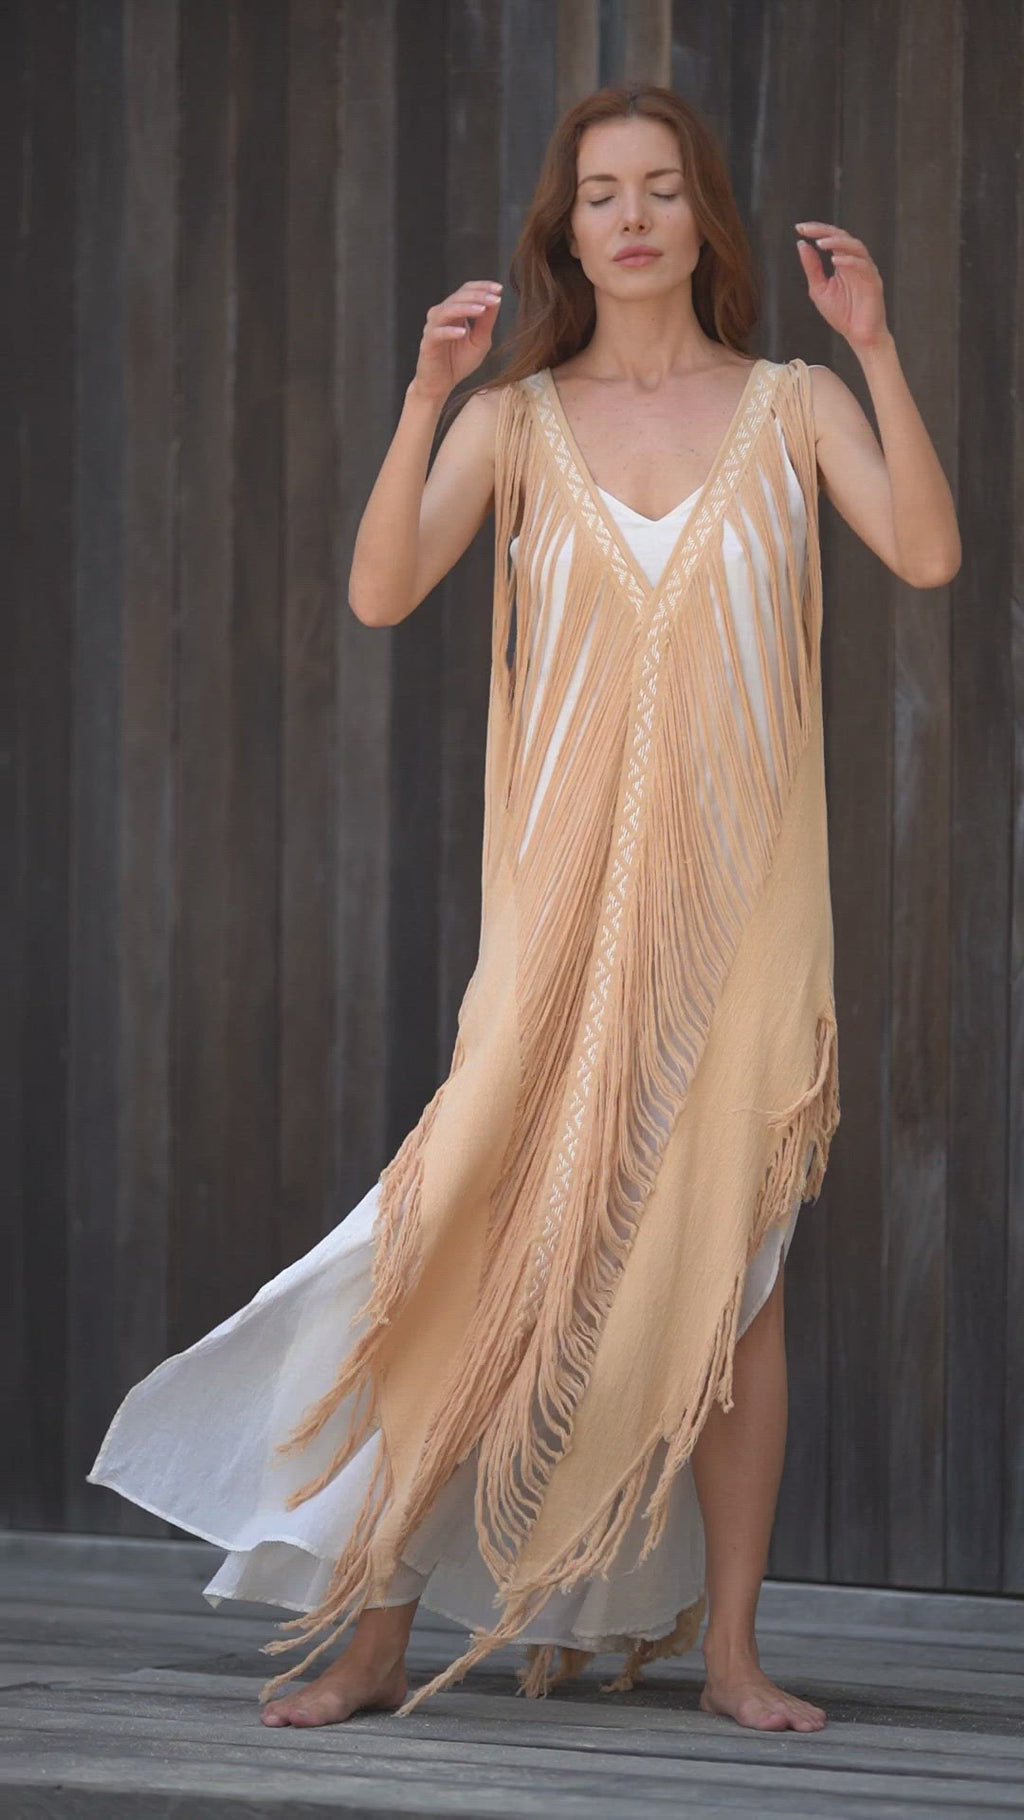 Get a dreamy look with this beige ochre "Threads of Life" dress.